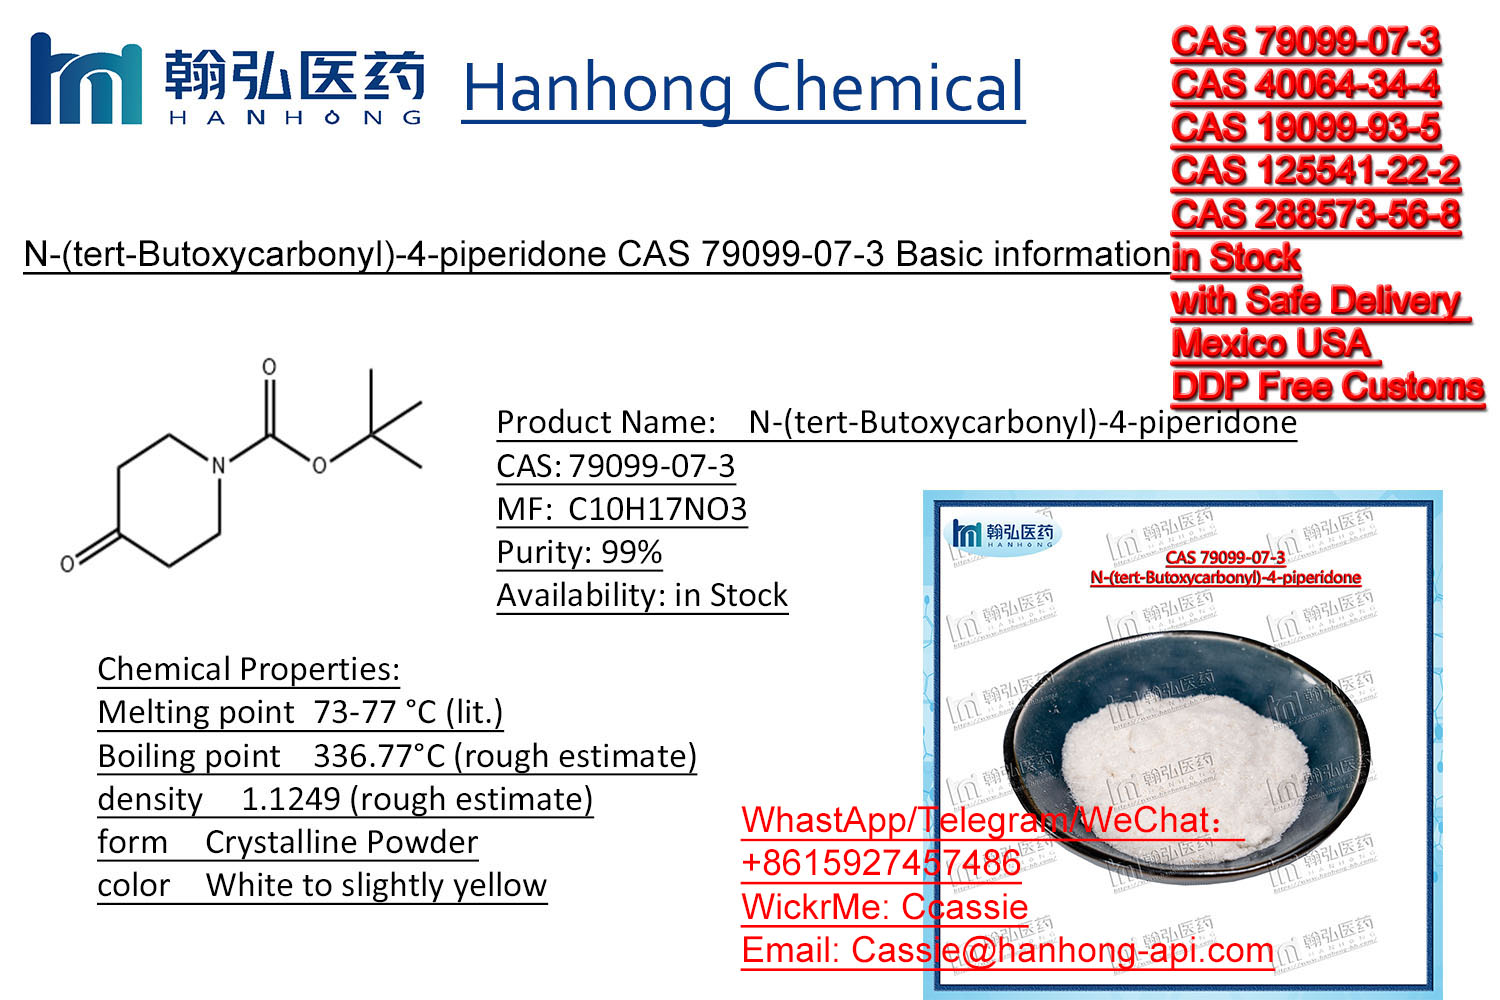 Hanhong Reliable Supplier Series of Piperdine Products 79099-07-3/40064-34-4/1451-82-7/125541-22-2/19099-93-5/BMK/PMK in Stock (WhastApp/WeChat: +8615927457486/WickrMe: Ccassie